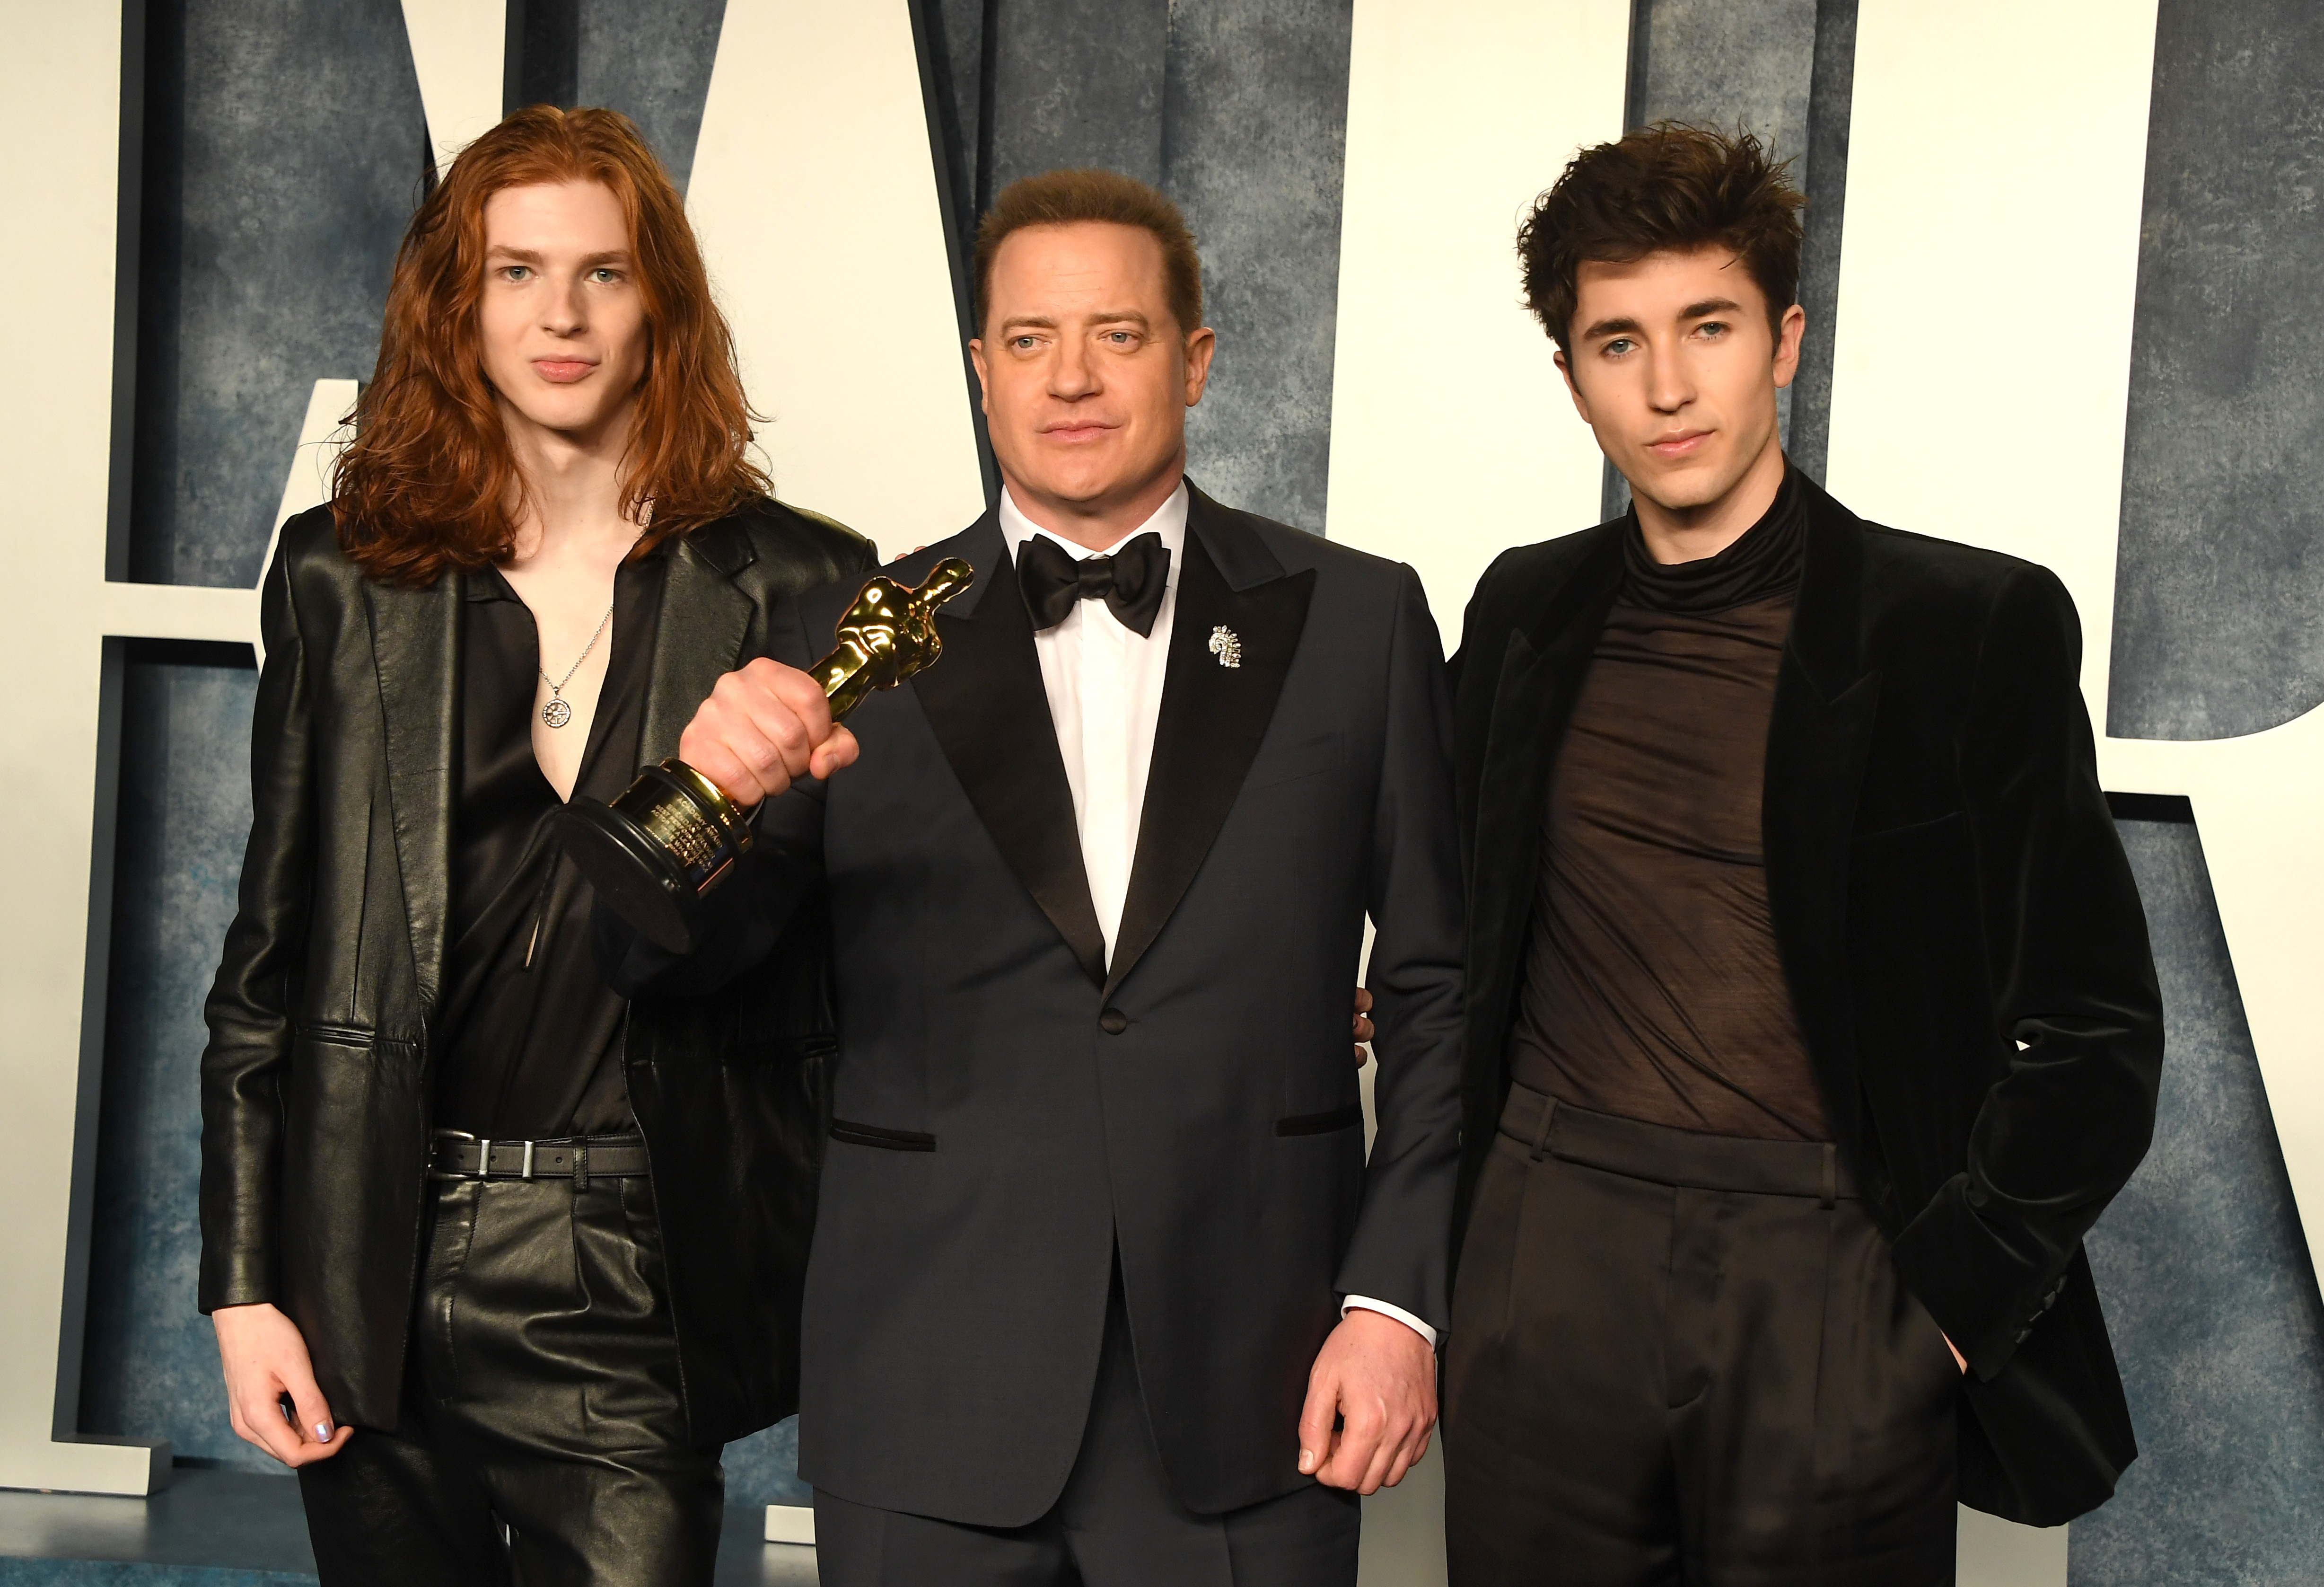 Holden Fraser, Brendan Fraser, and Leland Fraser at the Vanity Fair Oscar Party Hosted on March 12, 2023 in Beverly Hills, California. | Source: Getty Images